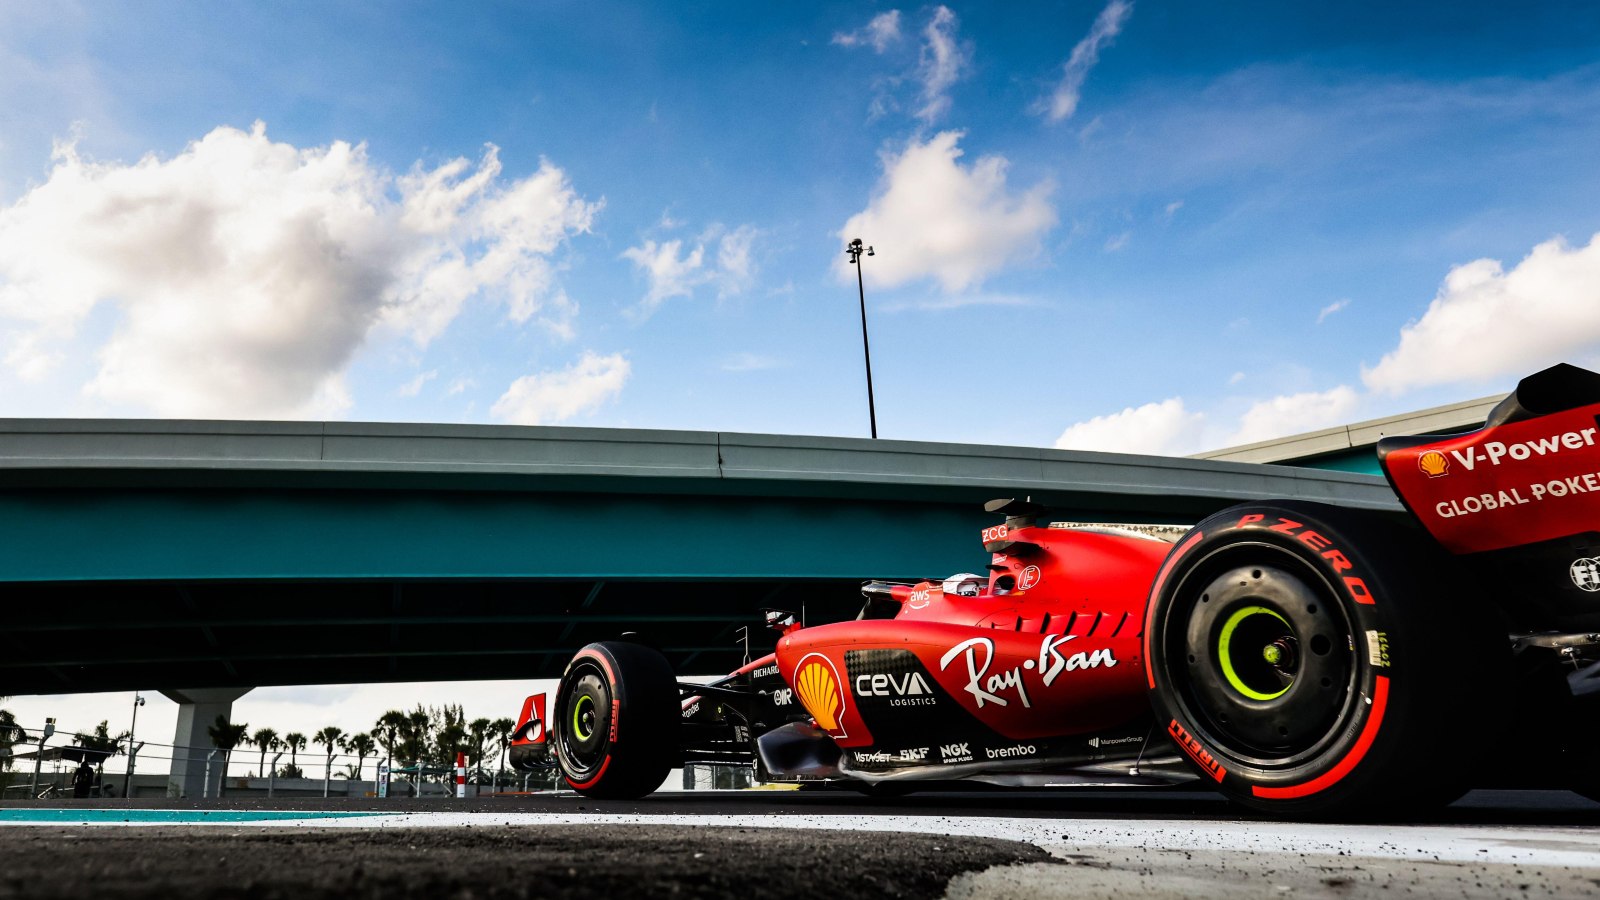 F1 2023 results: FP3 timings from Miami Grand Prix practice